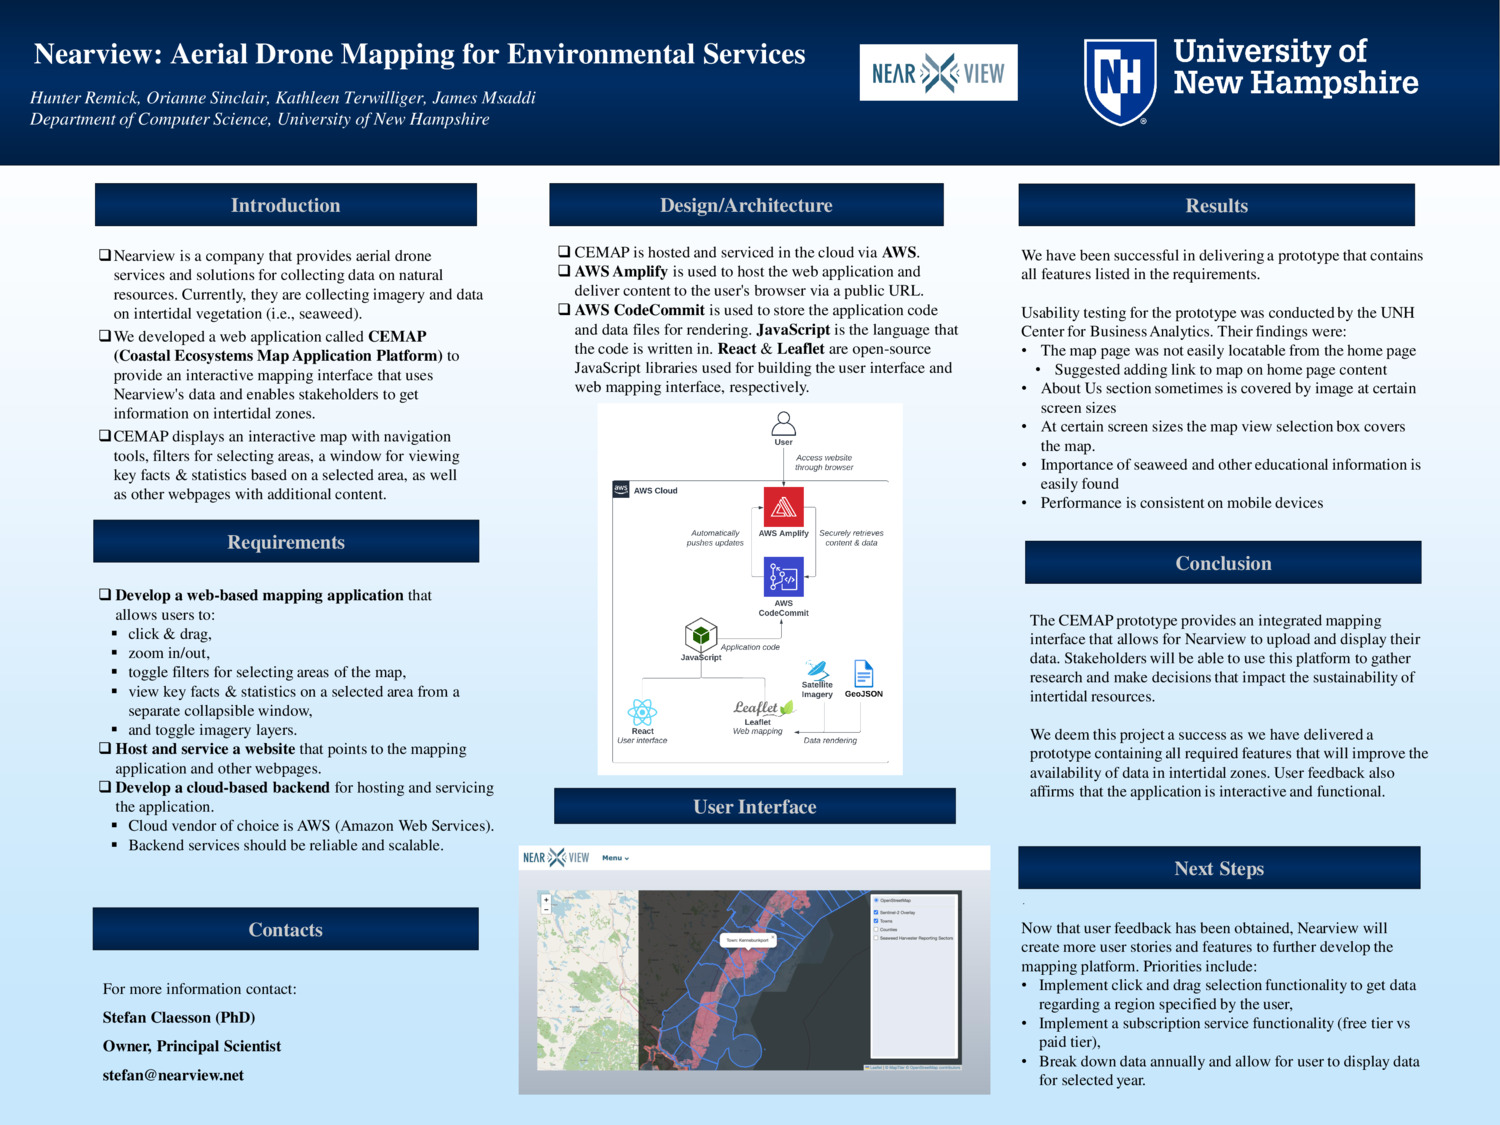 Nearview: Aerial Drone Mapping For Environmental Services by JamesMsaddi